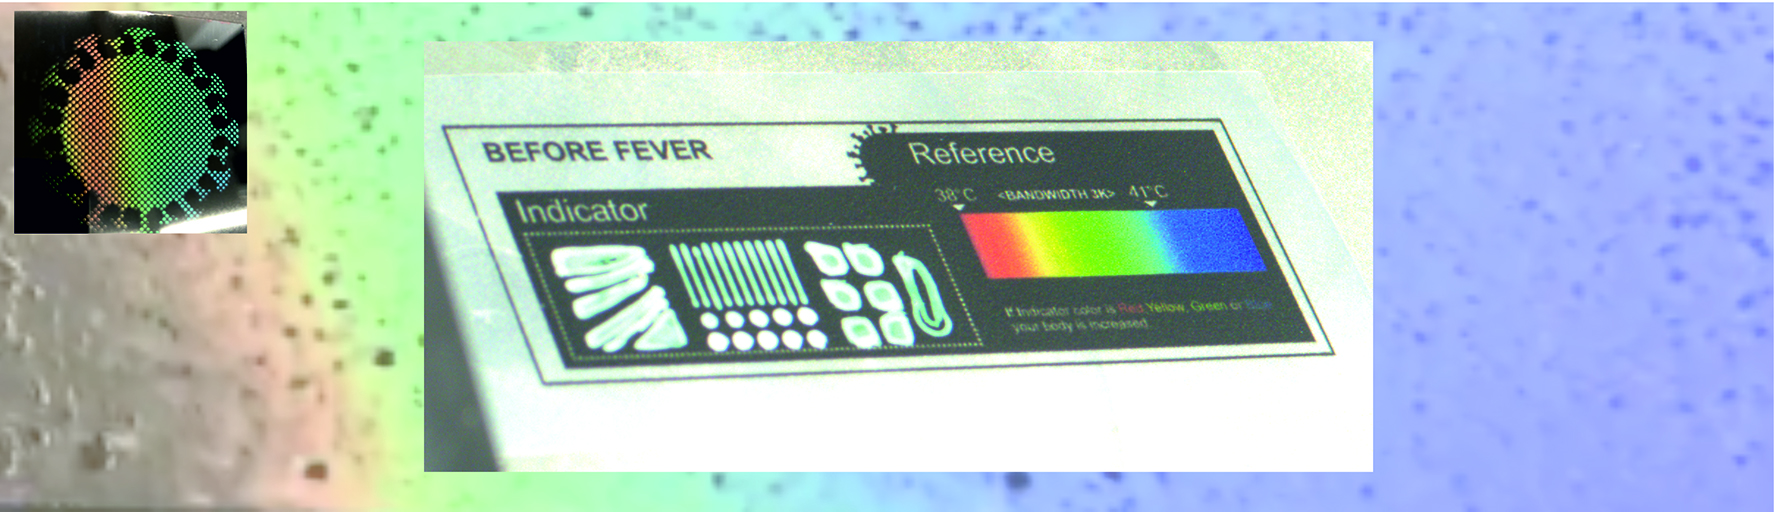 Technology demonstrator for temperature indication in fever patients by printing thermochromic inks onto skin-compatible substrates.